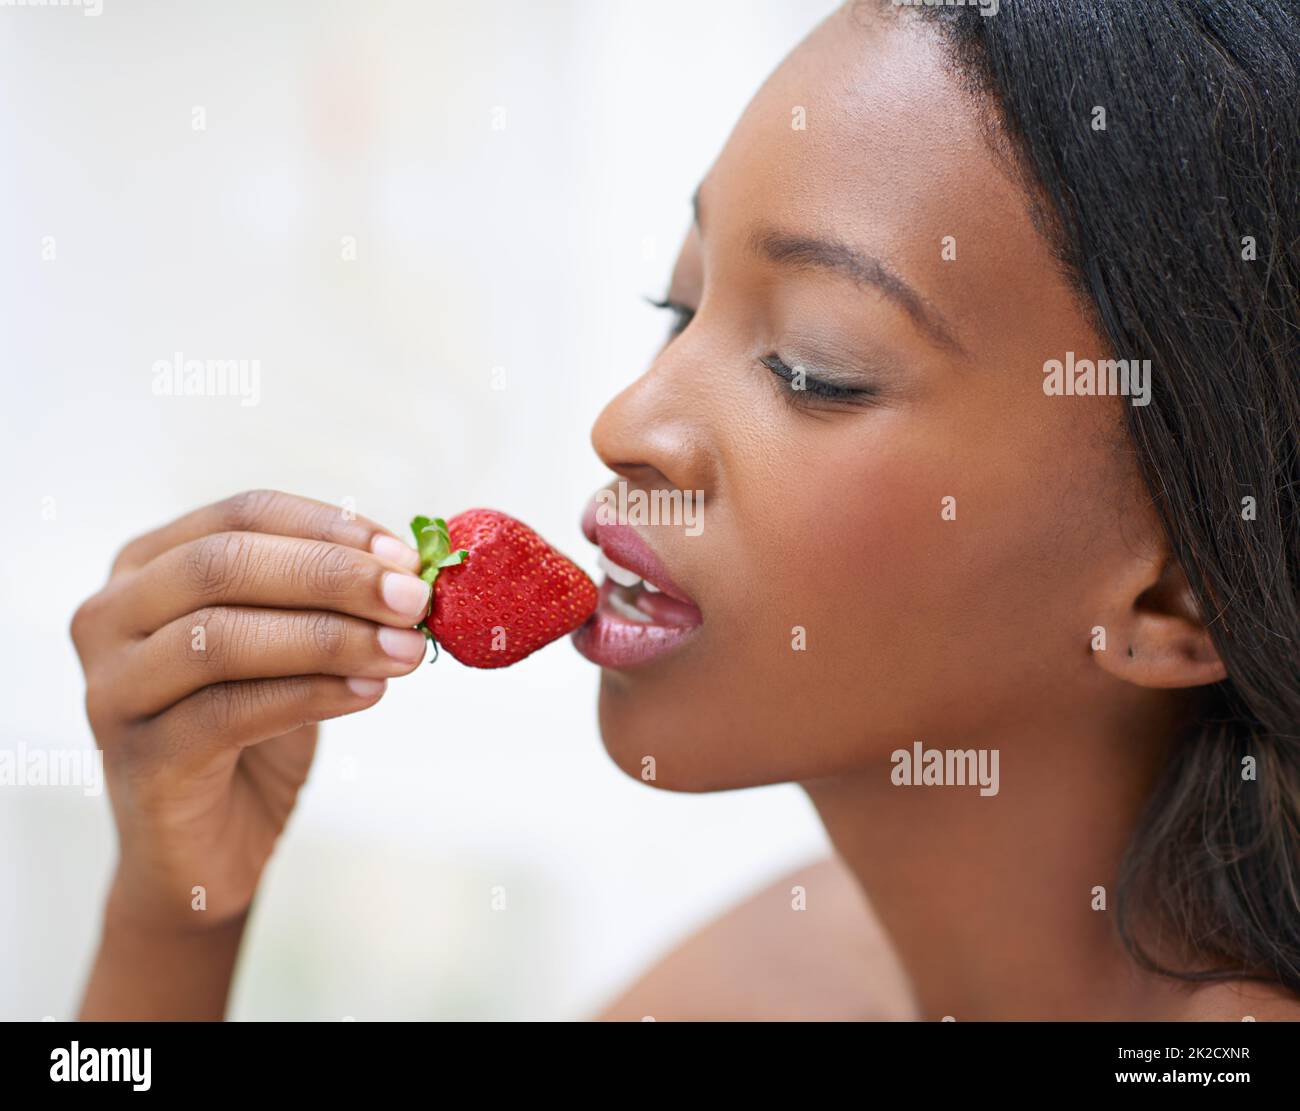 The forbidden fruit. Shot of a beautiful young woman eating strawberries. Stock Photo